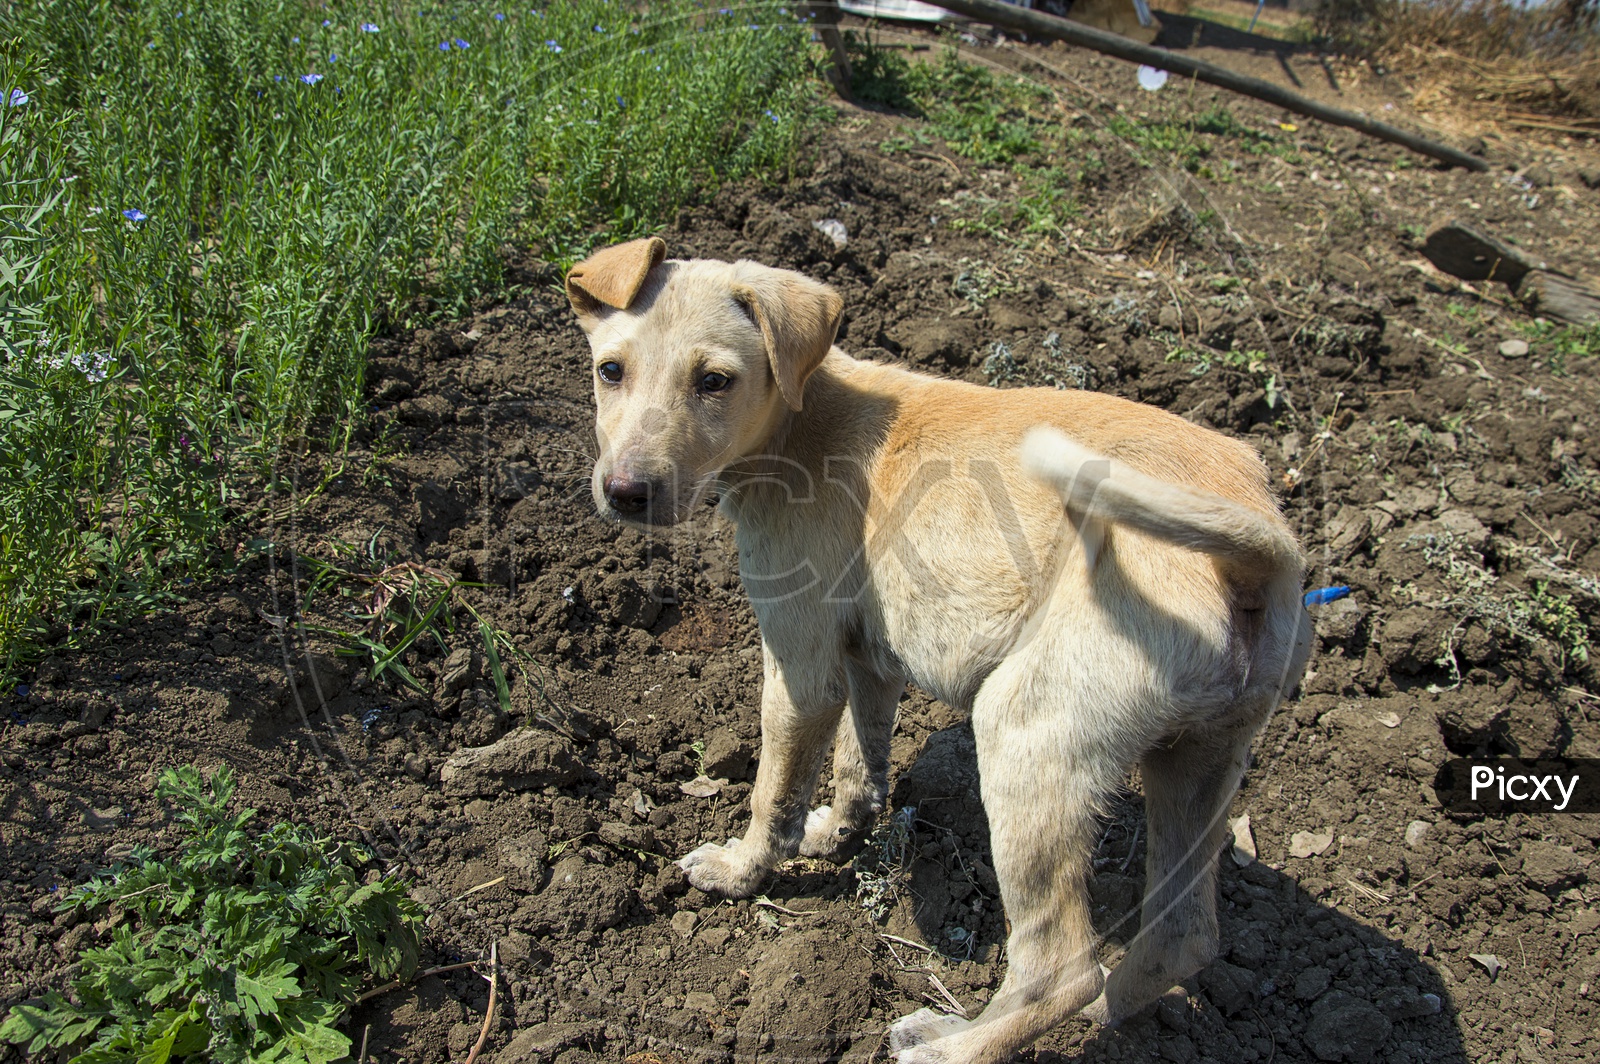 A Cute Puppy or Dog In an Agricultural Field